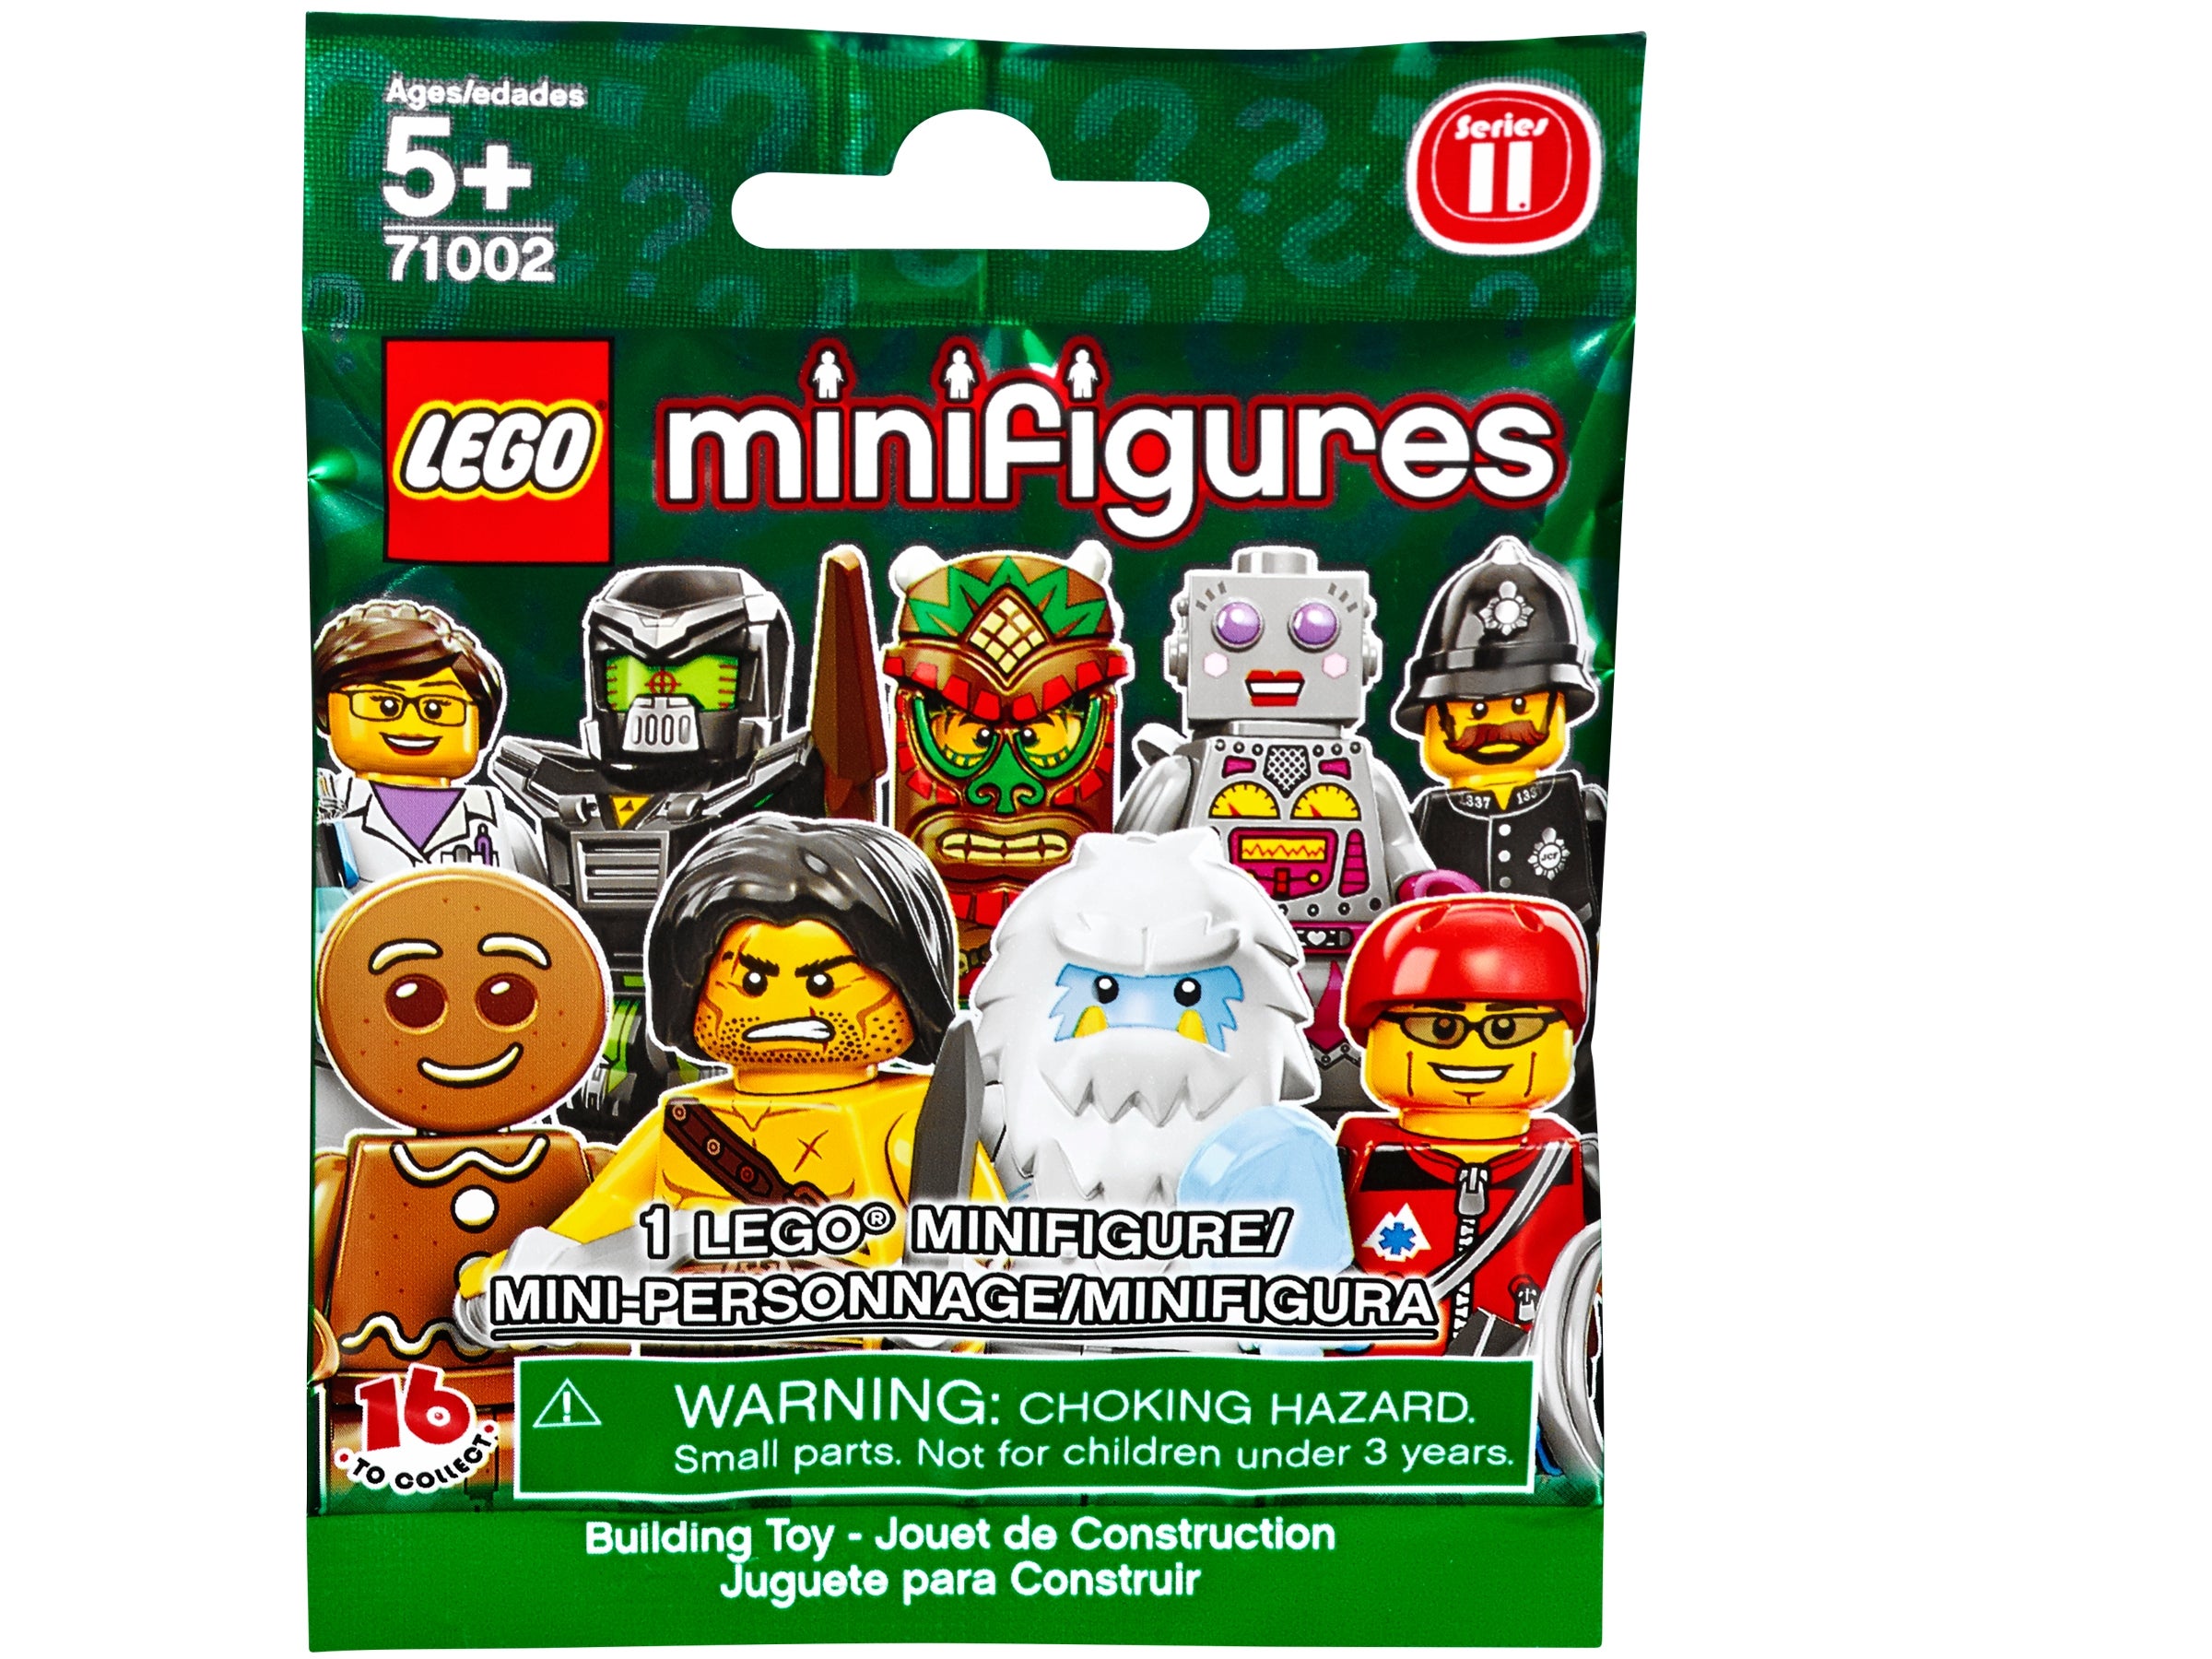 LEGO MINIFIGURE SERIES 11 71002 GINGERBREAD MAN BUY ANY 3 GET 4TH FREE